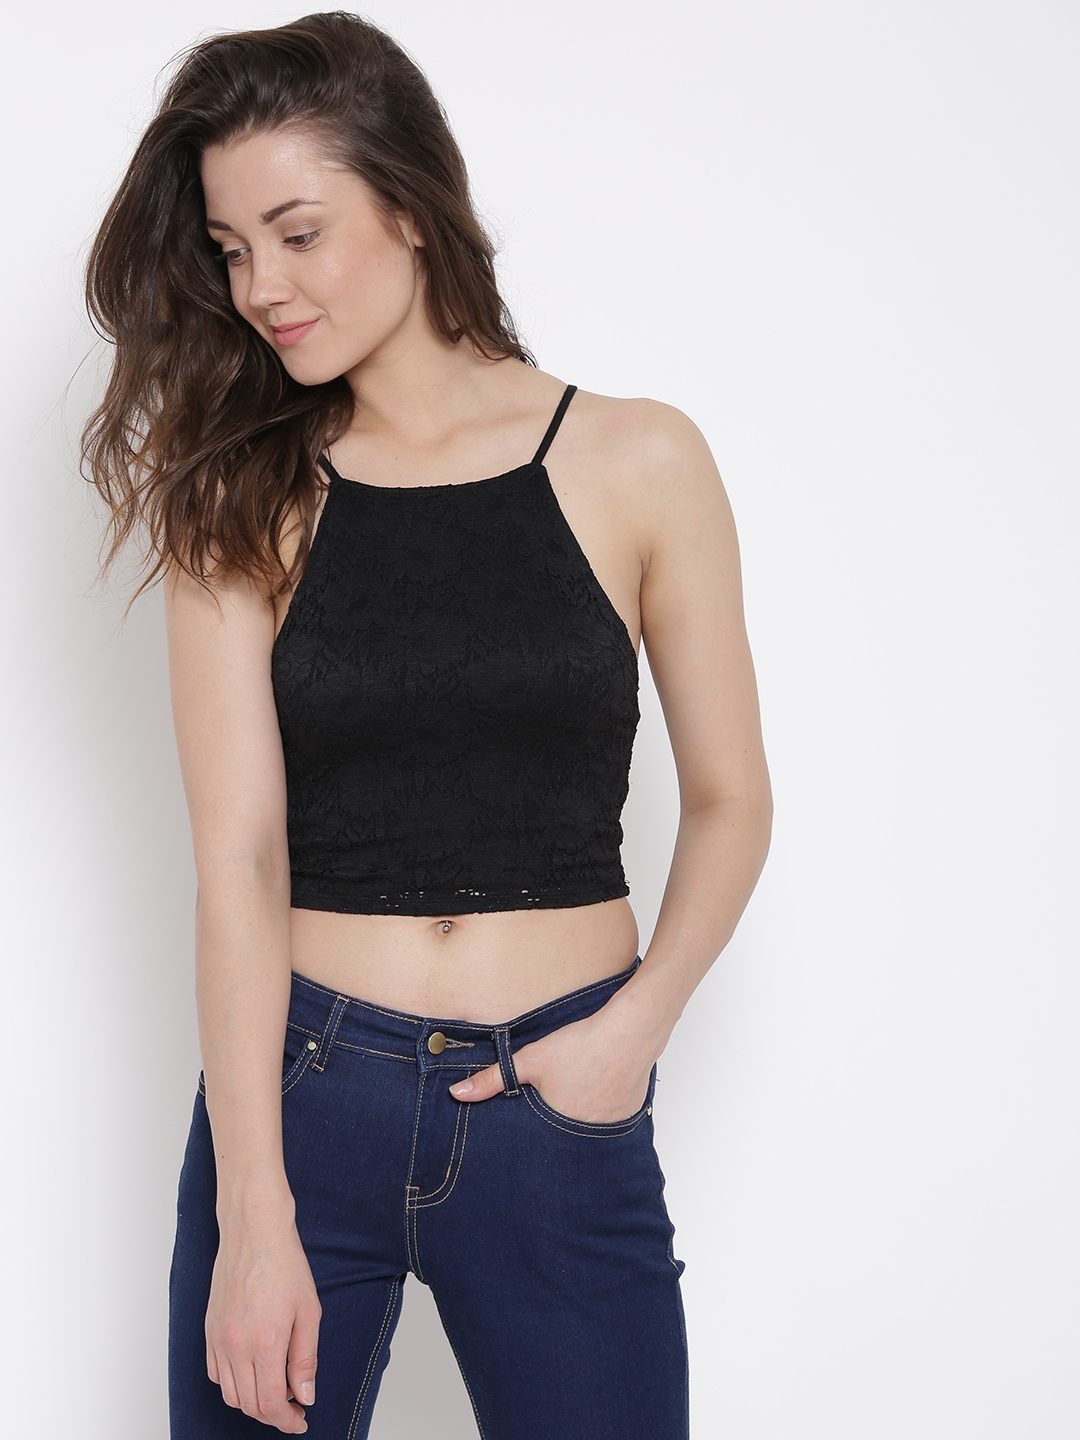 Buy FOREVER 21 Women Black Floral Lace Crop Top - Tops for Women ...